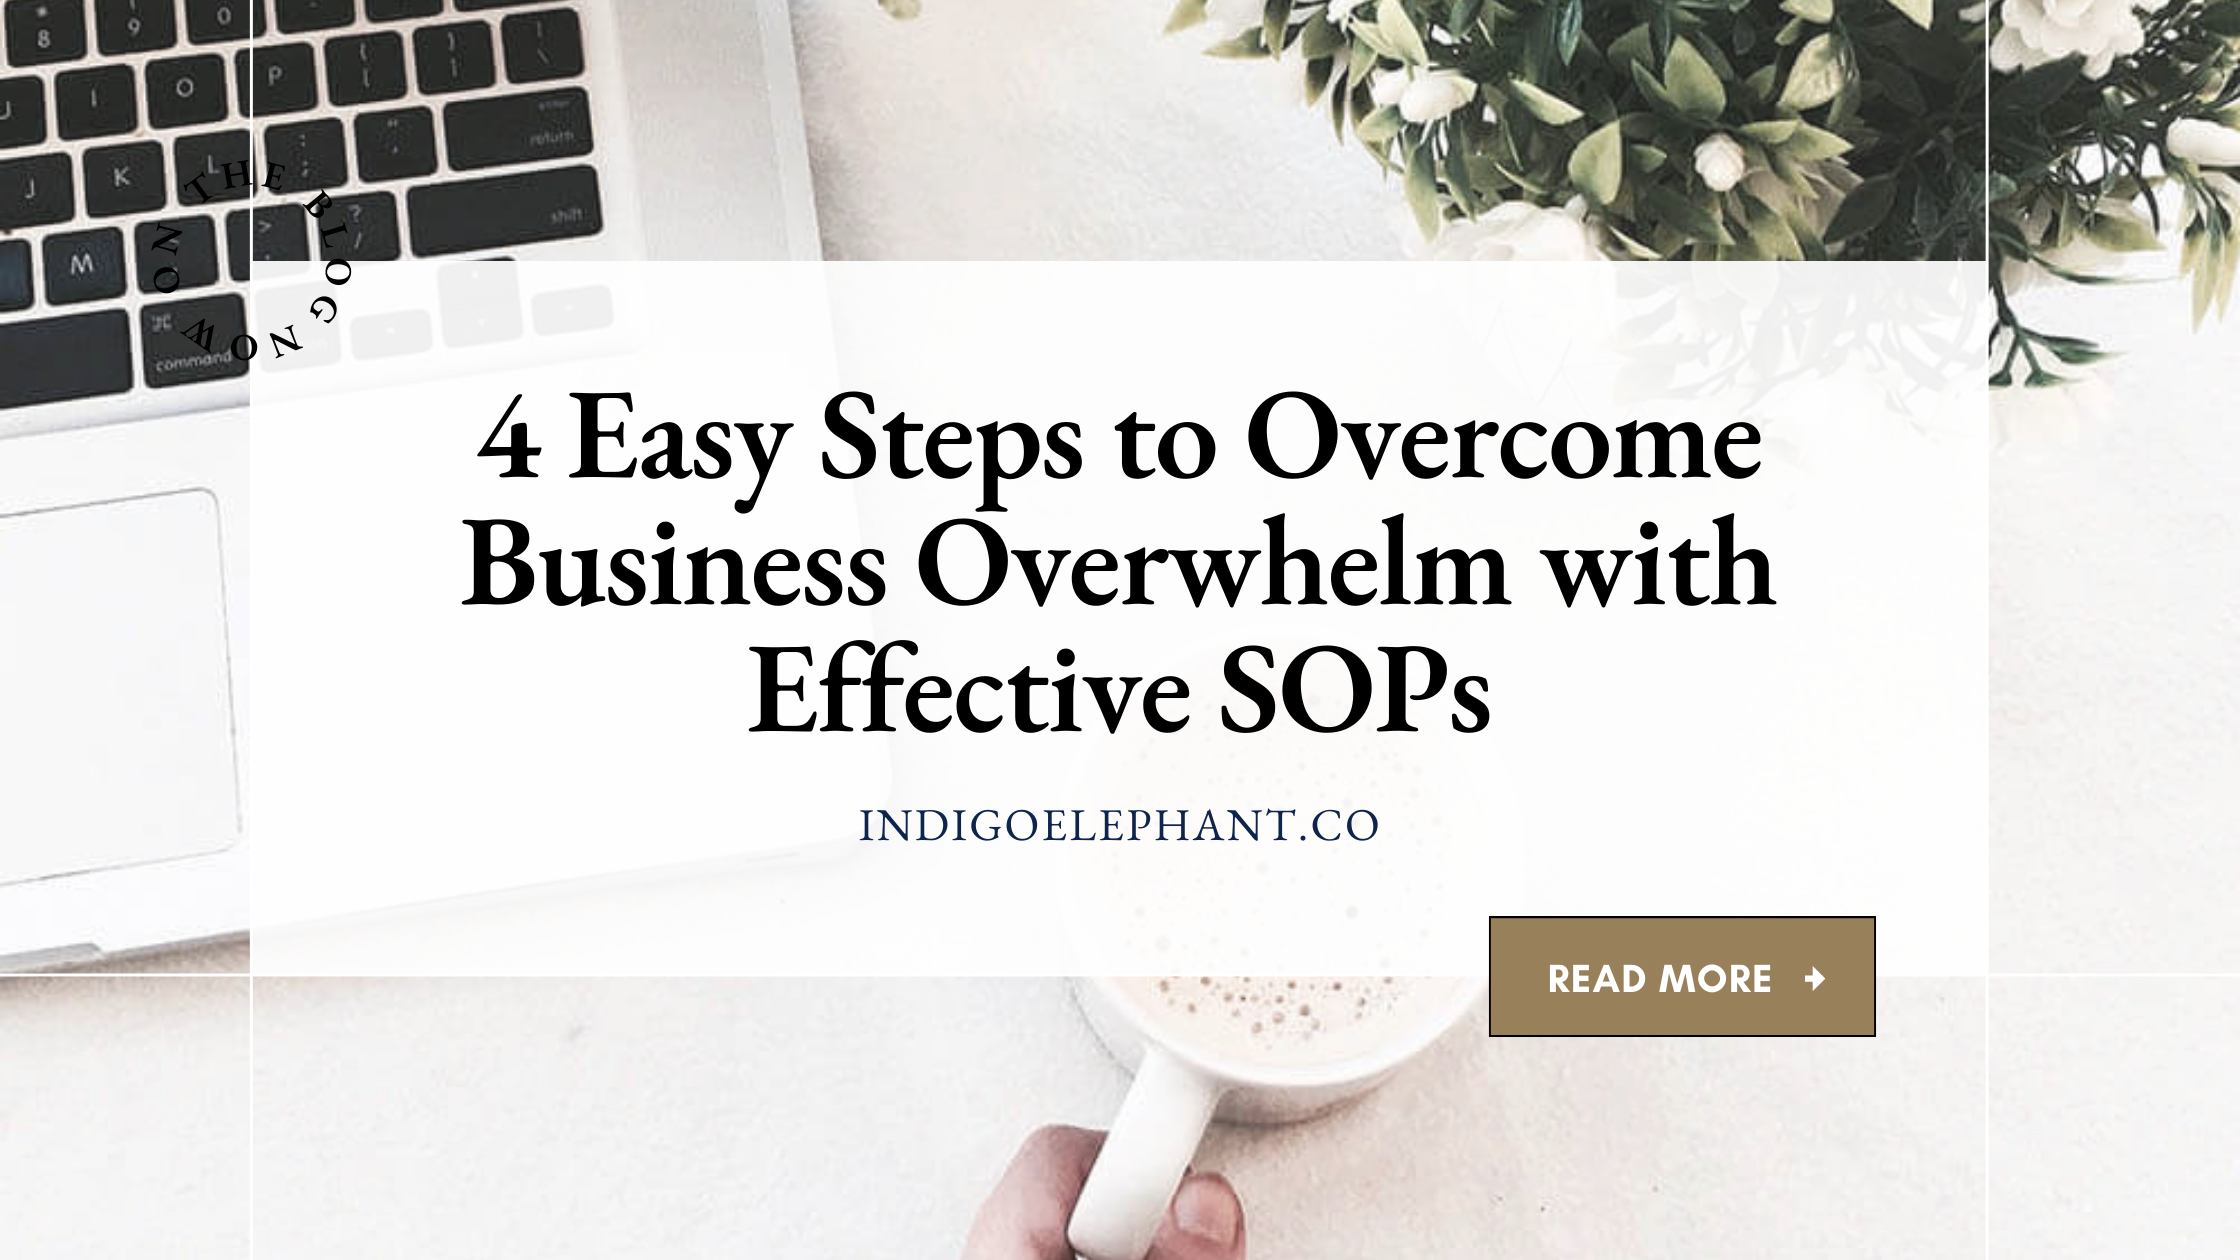 4 Easy Steps to Overcome Business Overwhelm with Effective SOPs